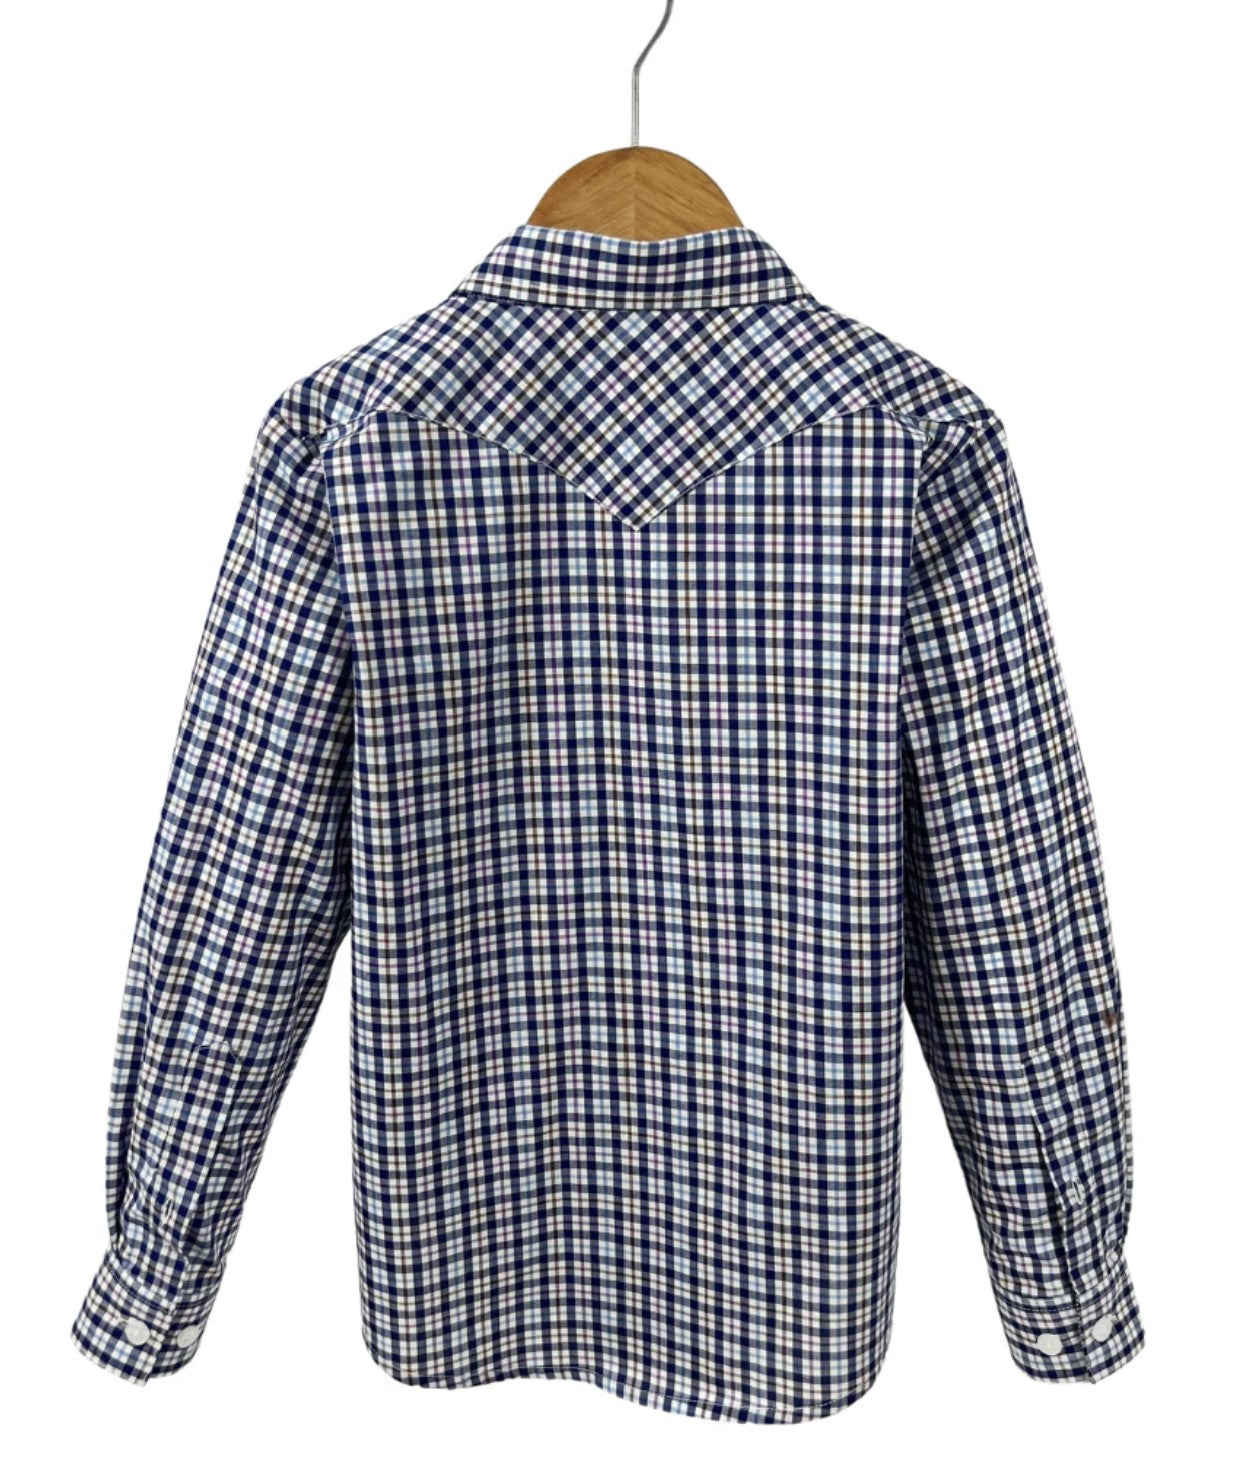 Parker - Classic Gingham Long Sleeve Shirt - Baby & Toddler